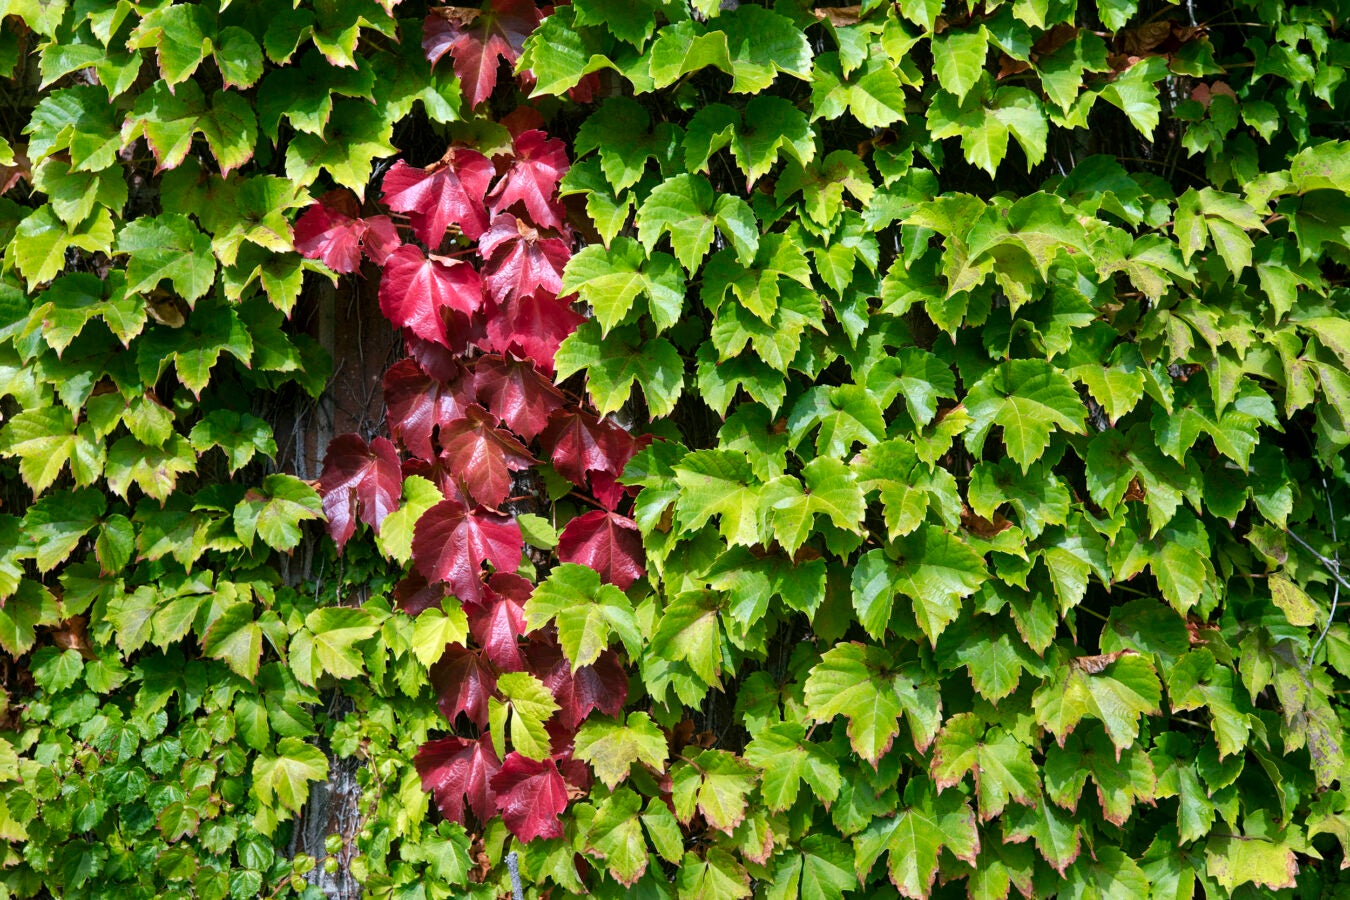 Ivy covers the wall of the Murr Center.